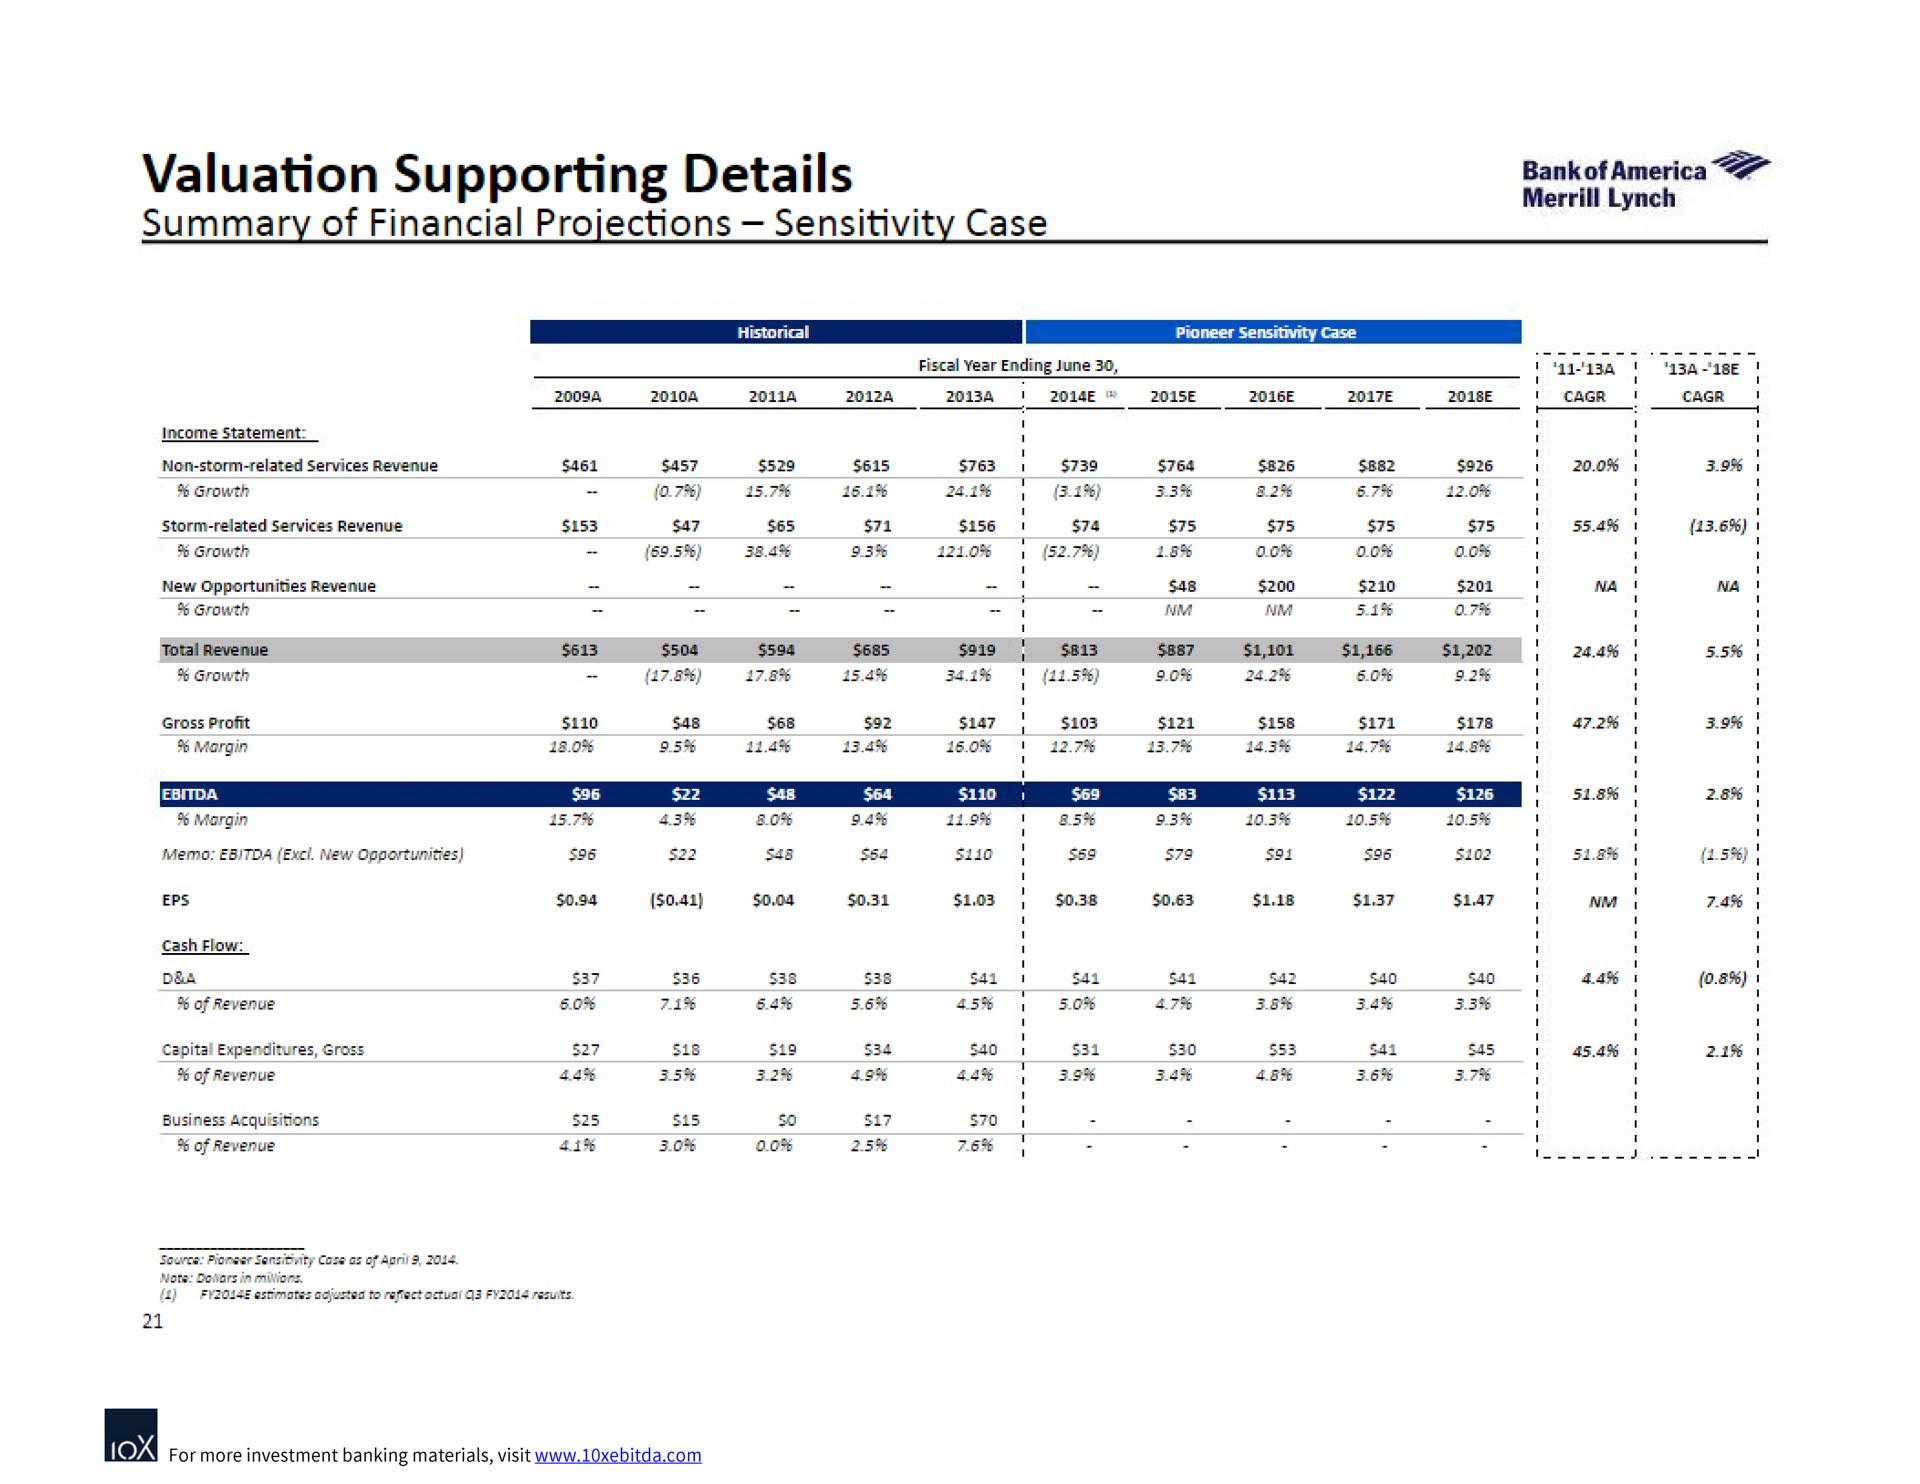 valuation supporting details | Bank of America